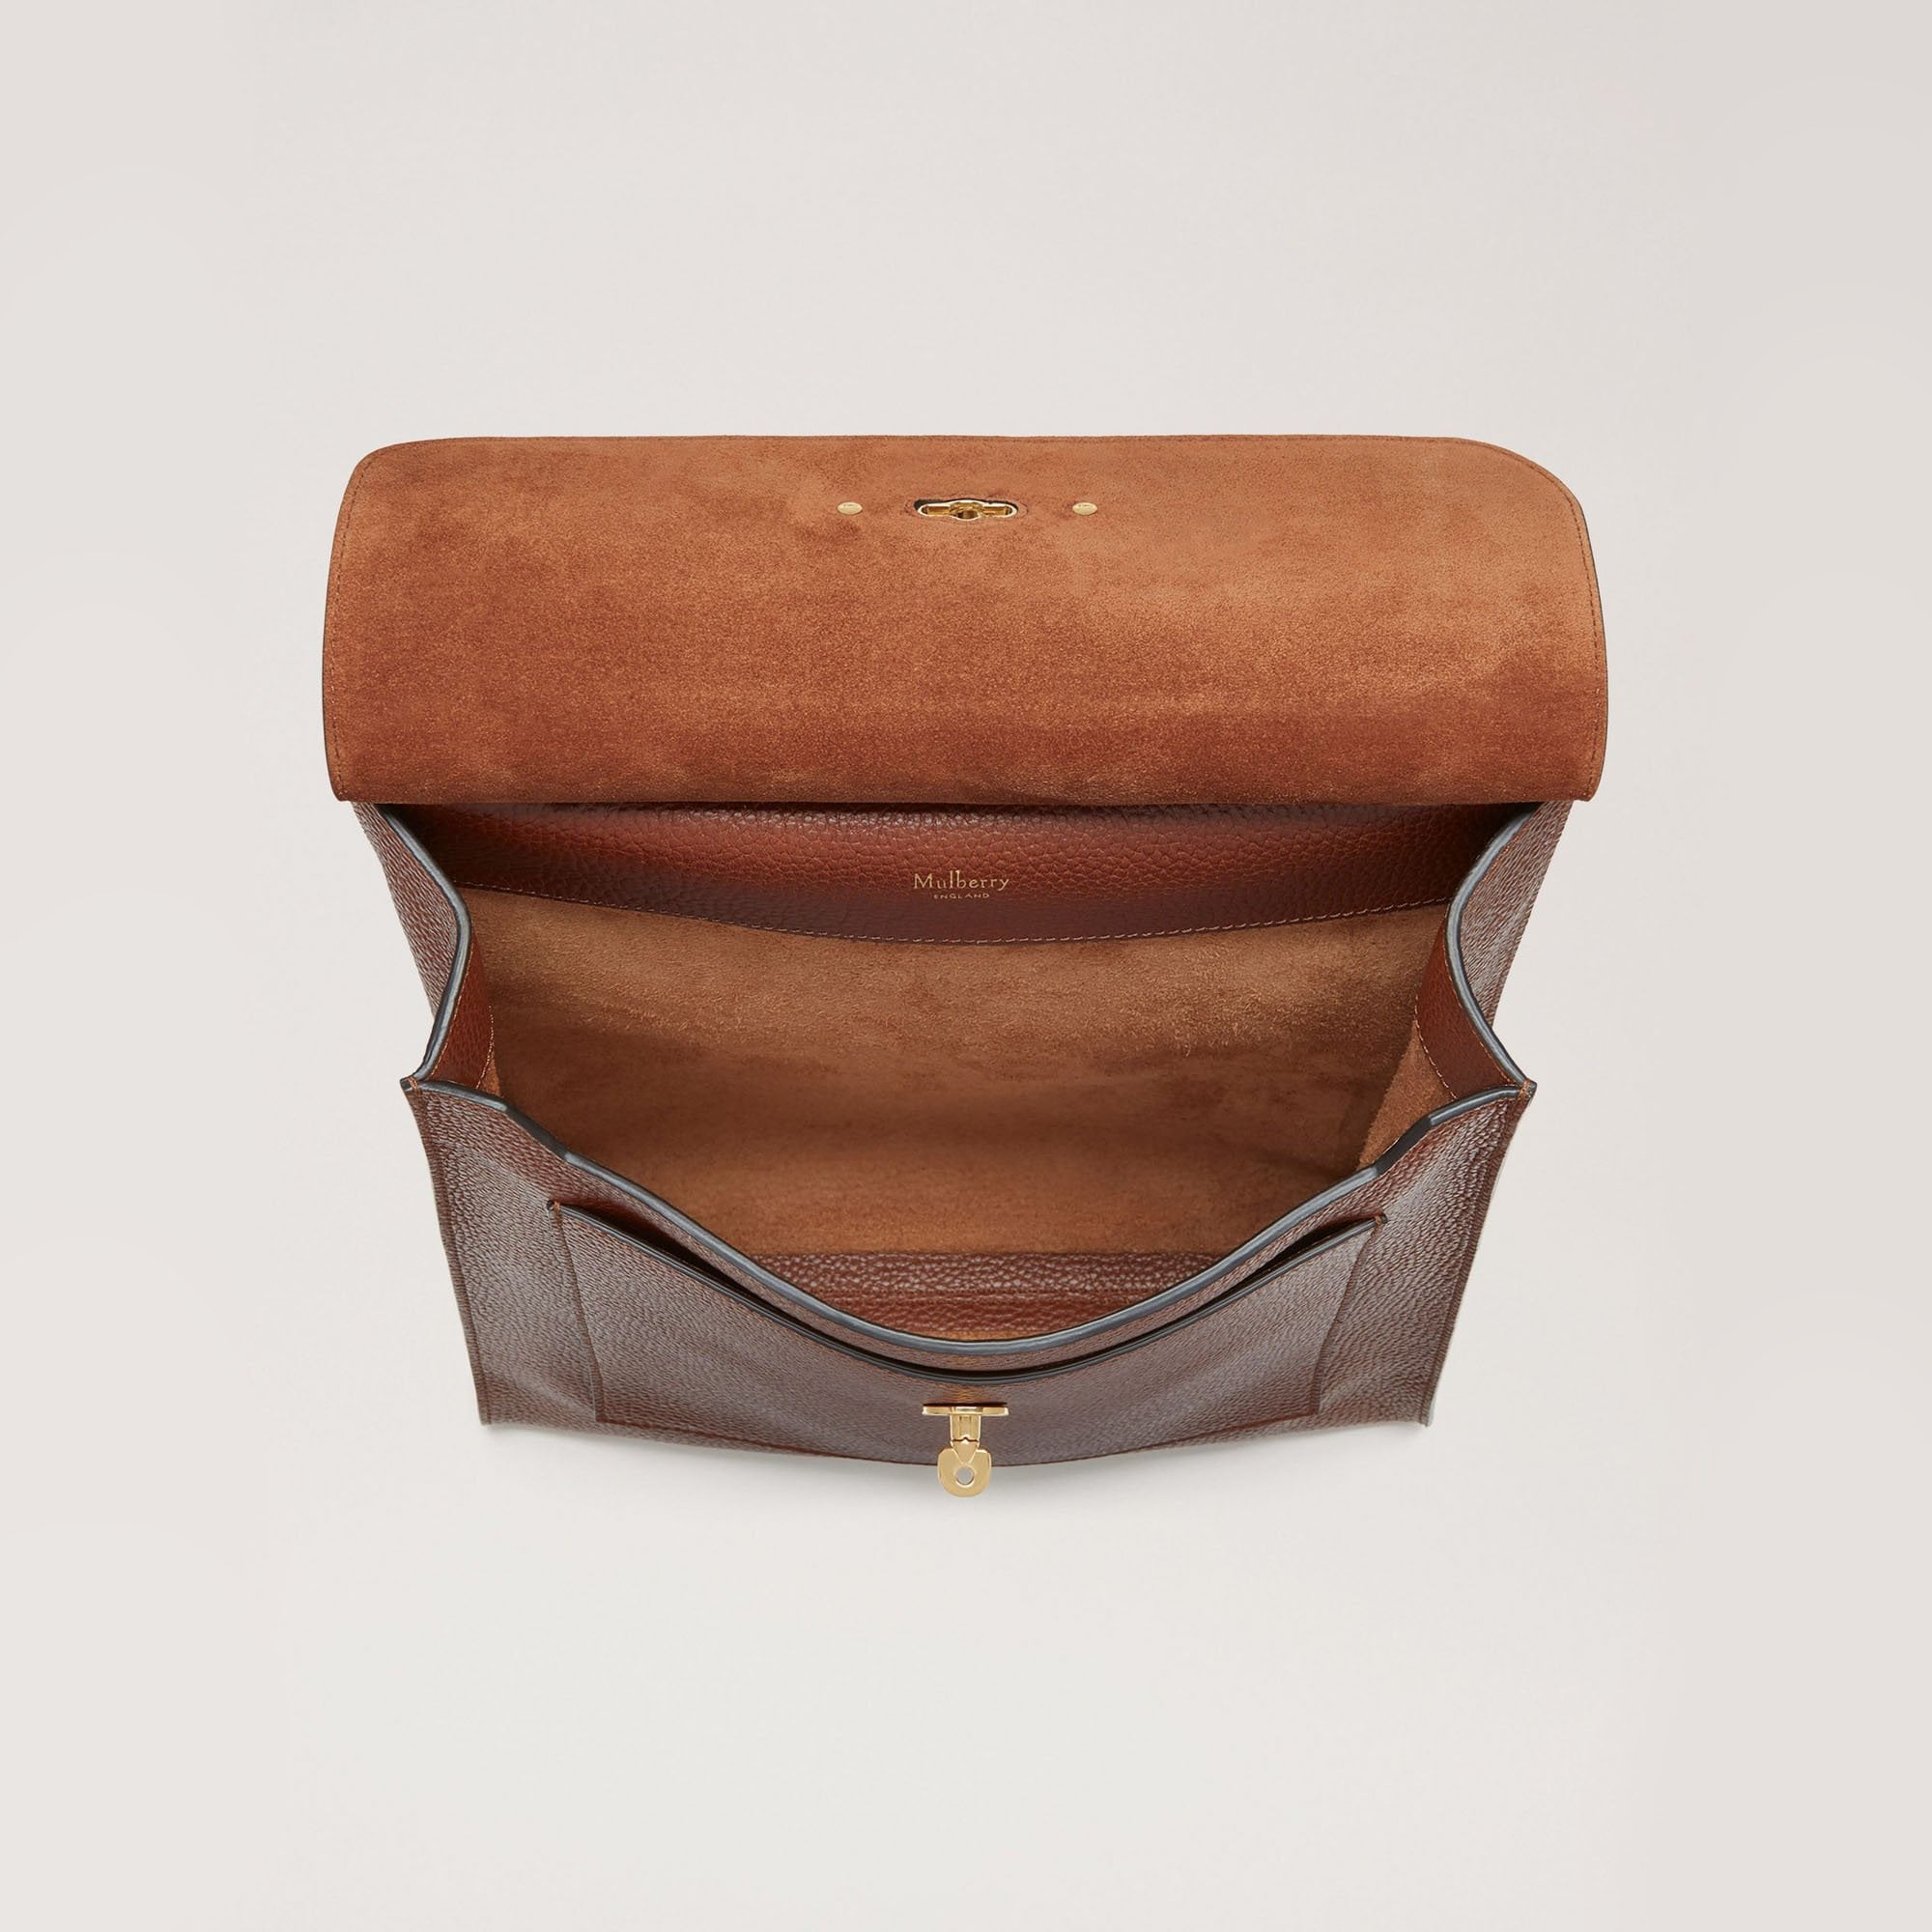 Lot - A Mulberry small Darley shoulder bag in 'oak' natural grain tan brown  leather with yellow gold hardware,